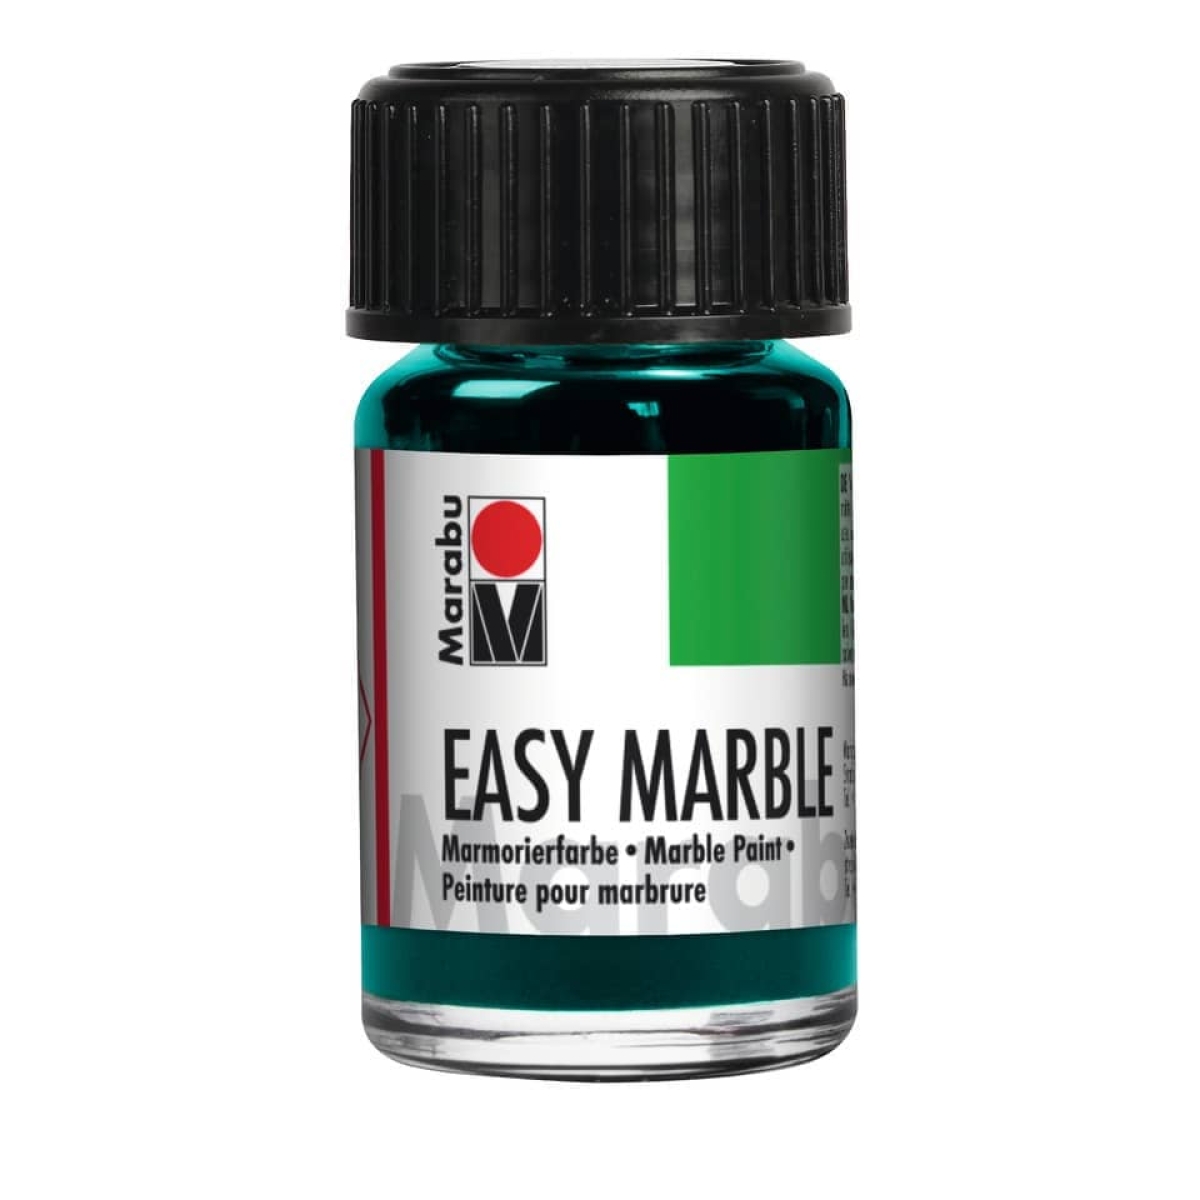 MARABUMarbling paint Easy Marble, 15ml, turquoise 13050 039 098Article-No: 4007751089090